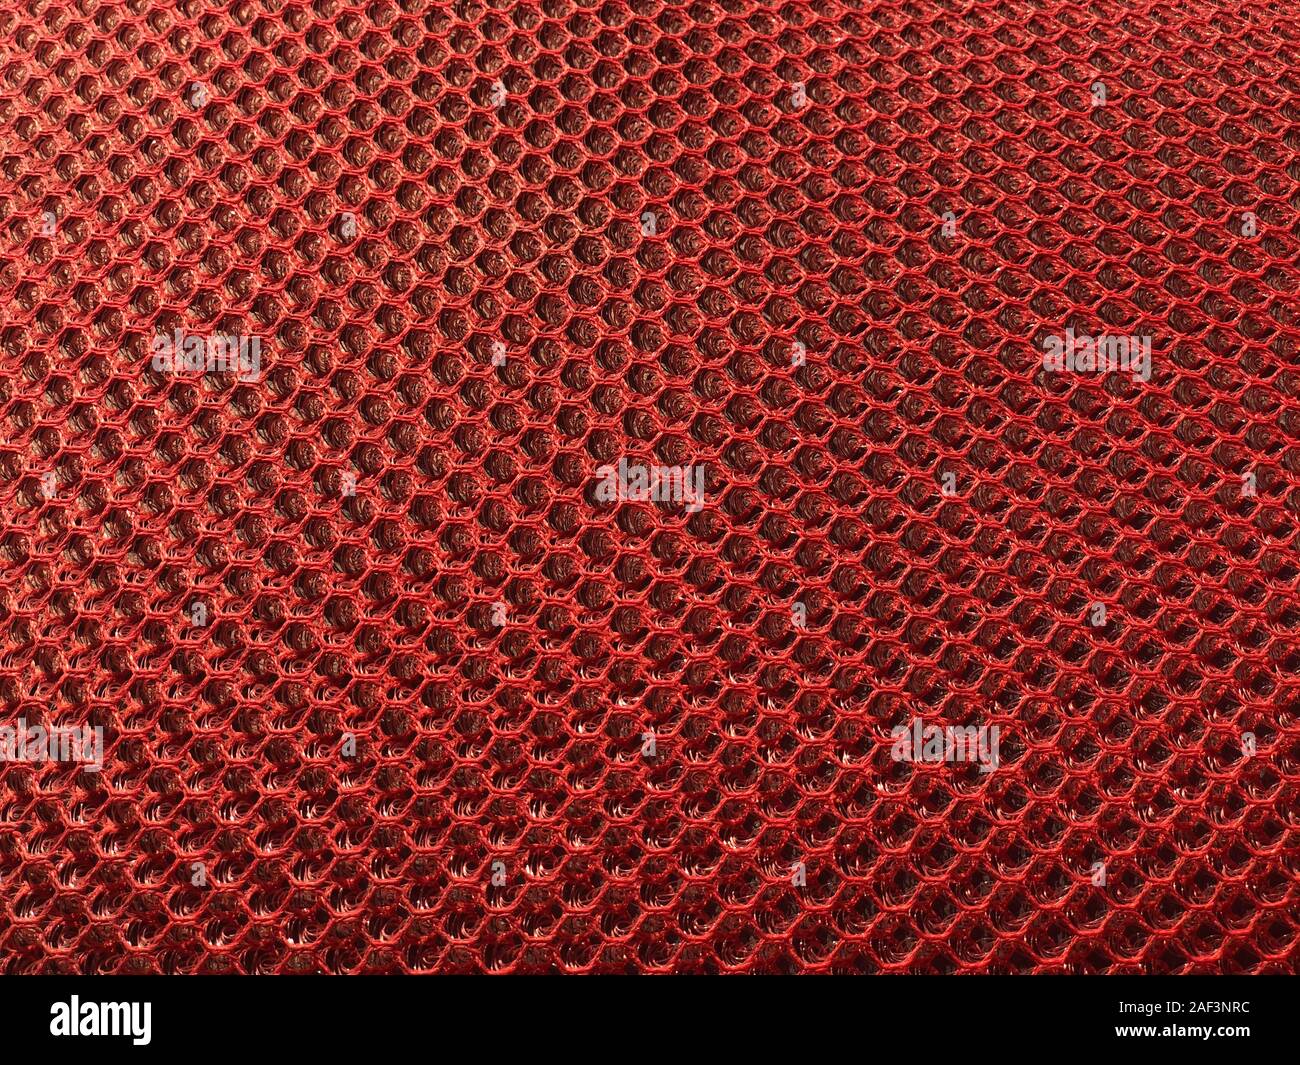 Synthetic fabric texture, red cell, nice background pattern. For upholstery of furniture. Stock Photo